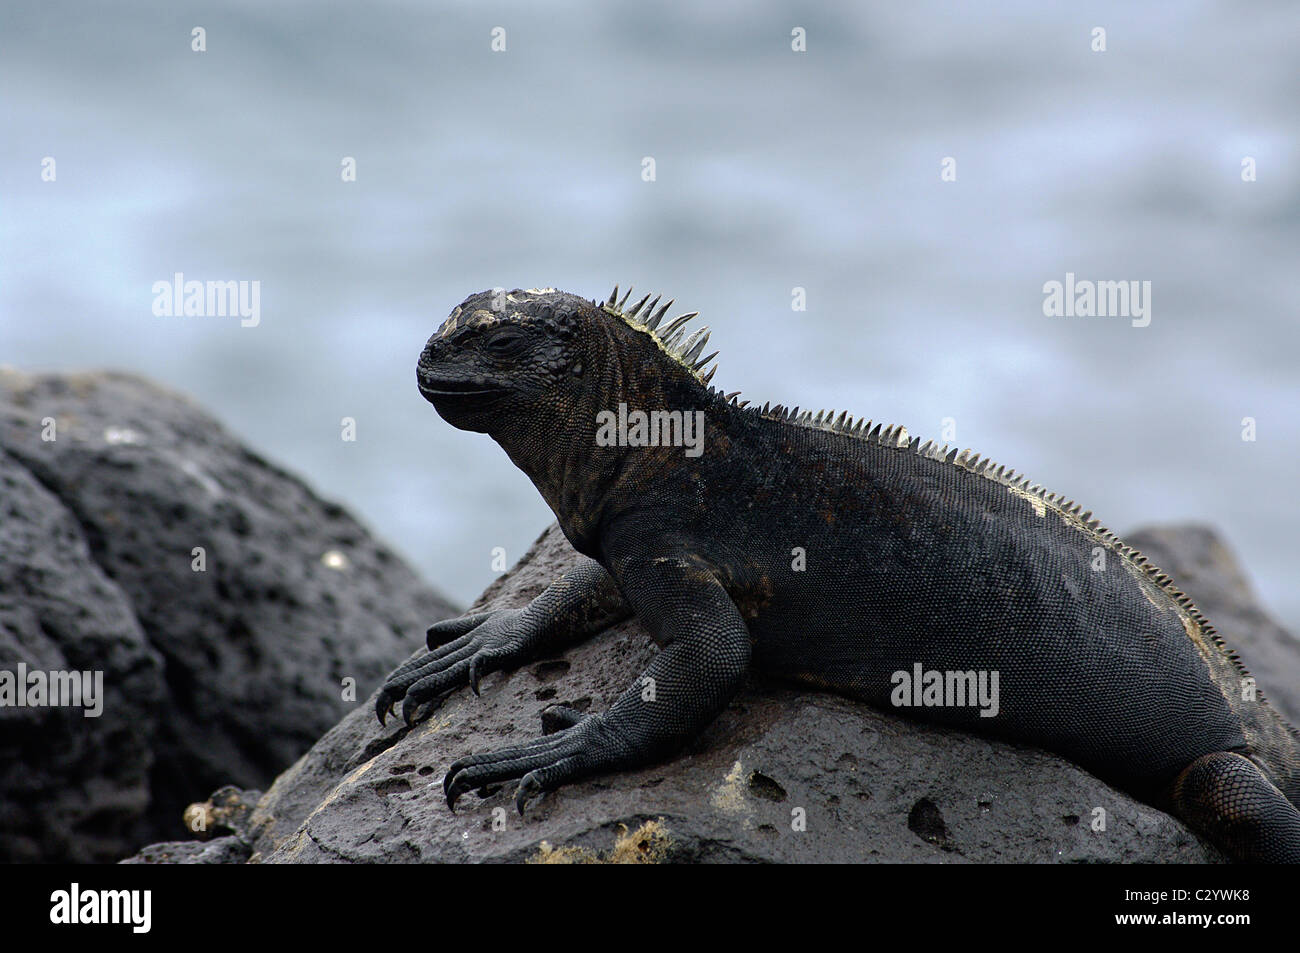 A Marine Iguana sunning itself on a rock in the Galapagos Islands Stock Photo